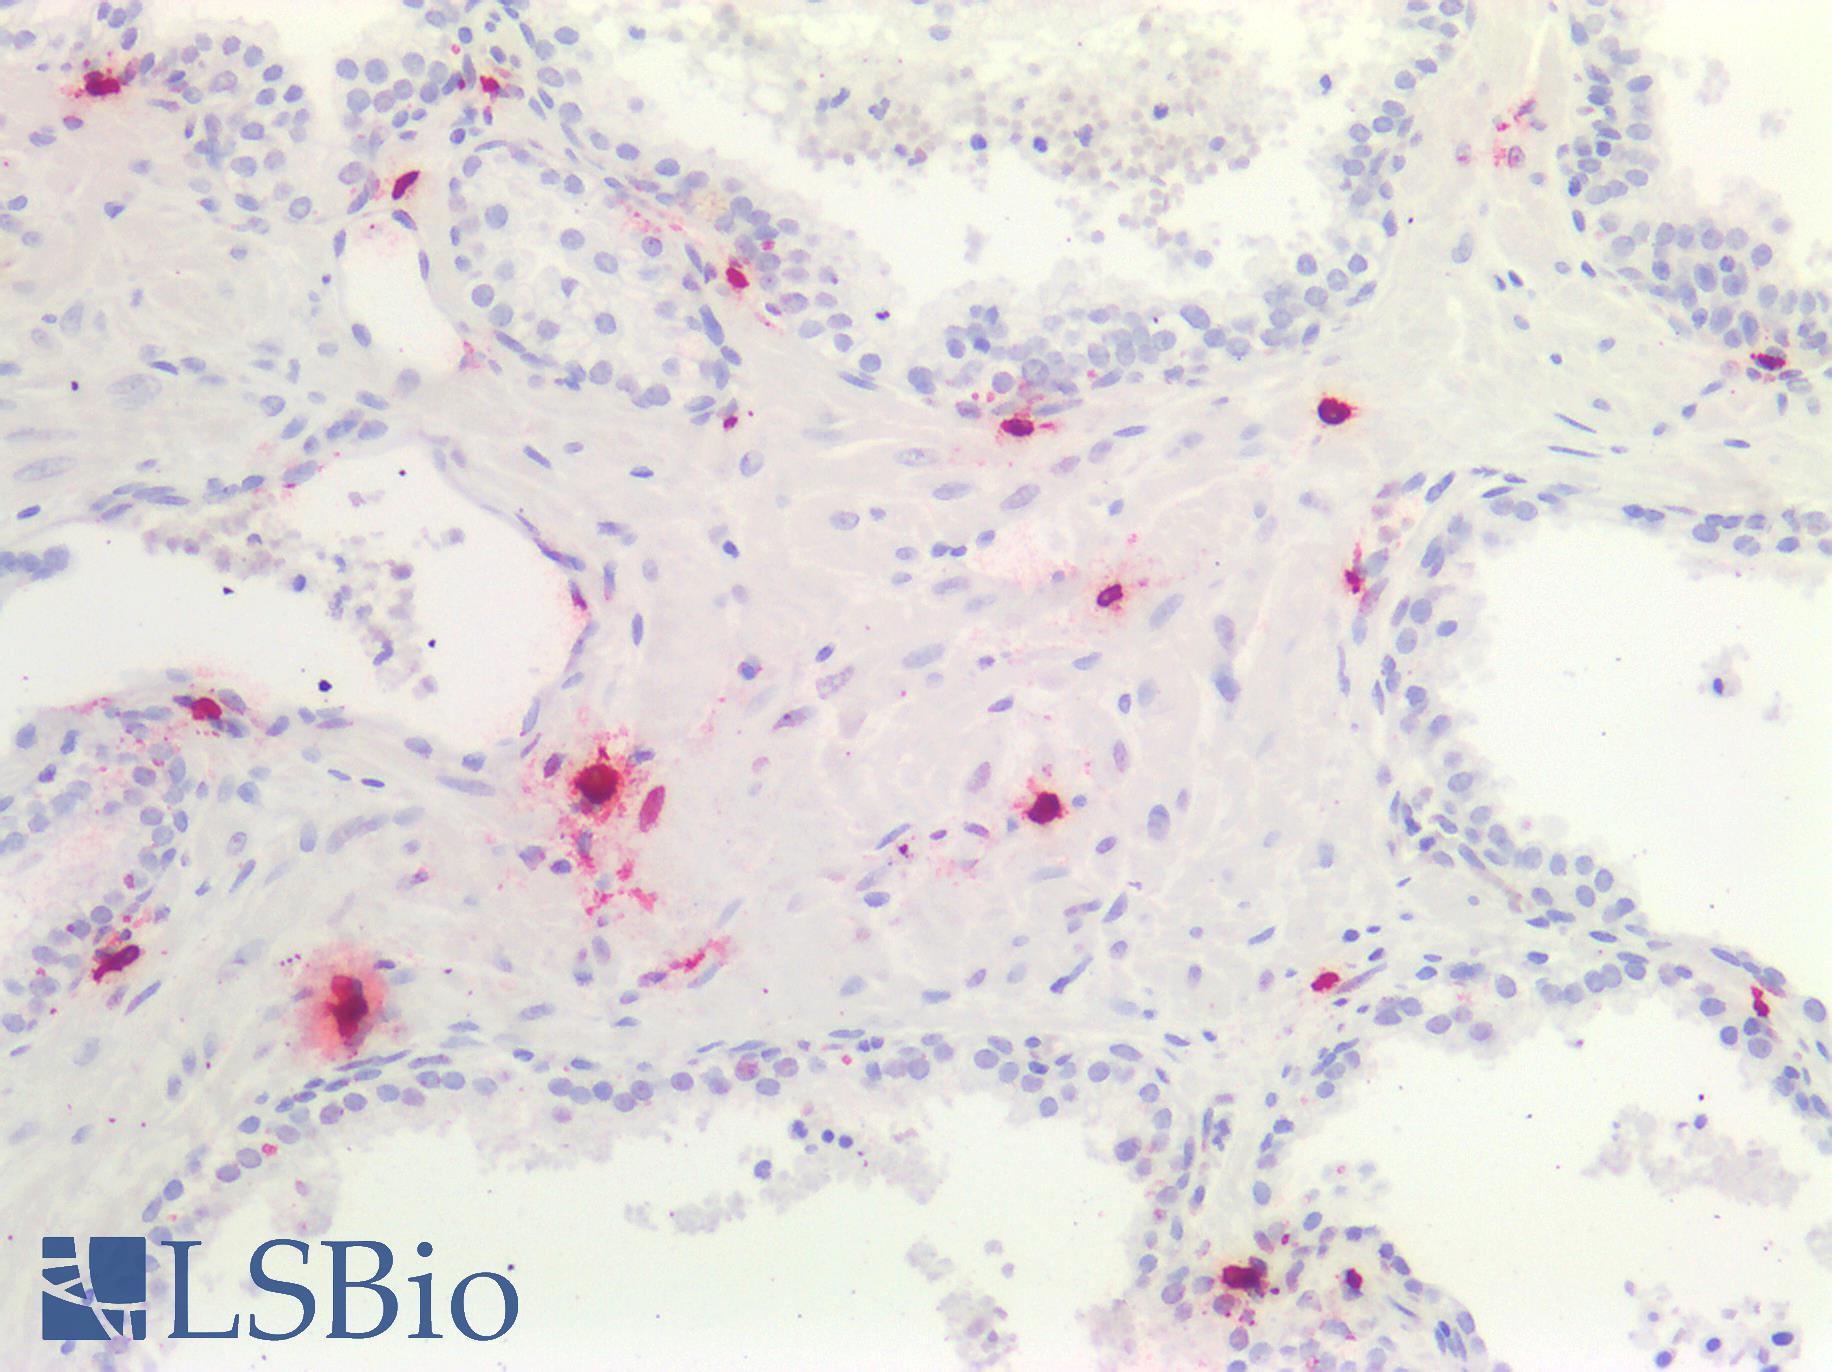 TPSAB1 / Mast Cell Tryptase Antibody - Human Prostate, Mast Cells: Formalin-Fixed, Paraffin-Embedded (FFPE)